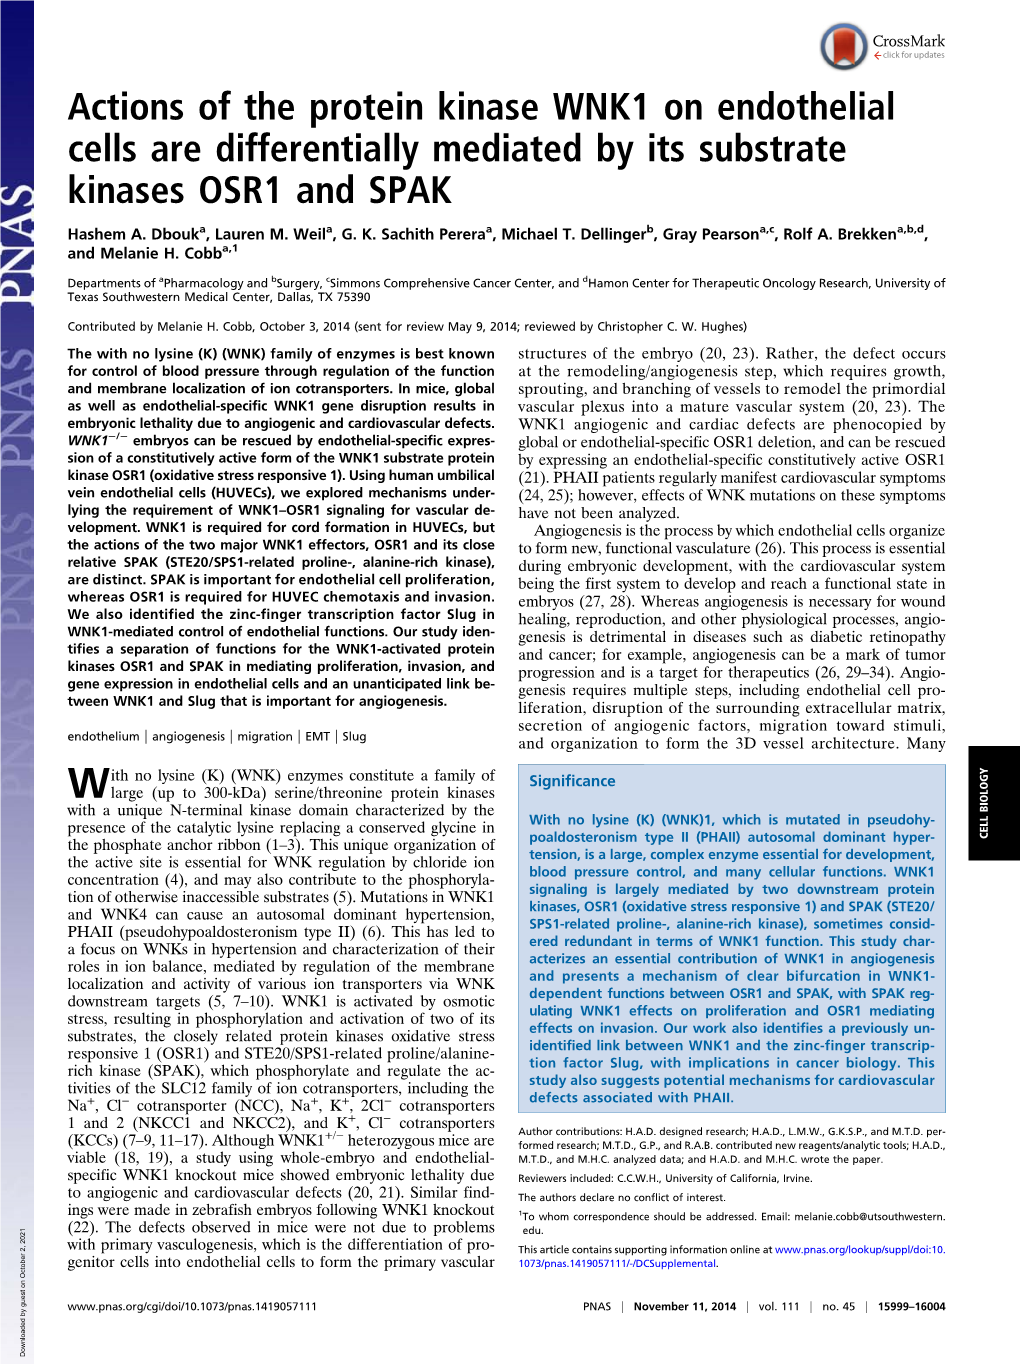 Actions of the Protein Kinase WNK1 on Endothelial Cells Are Differentially Mediated by Its Substrate Kinases OSR1 and SPAK